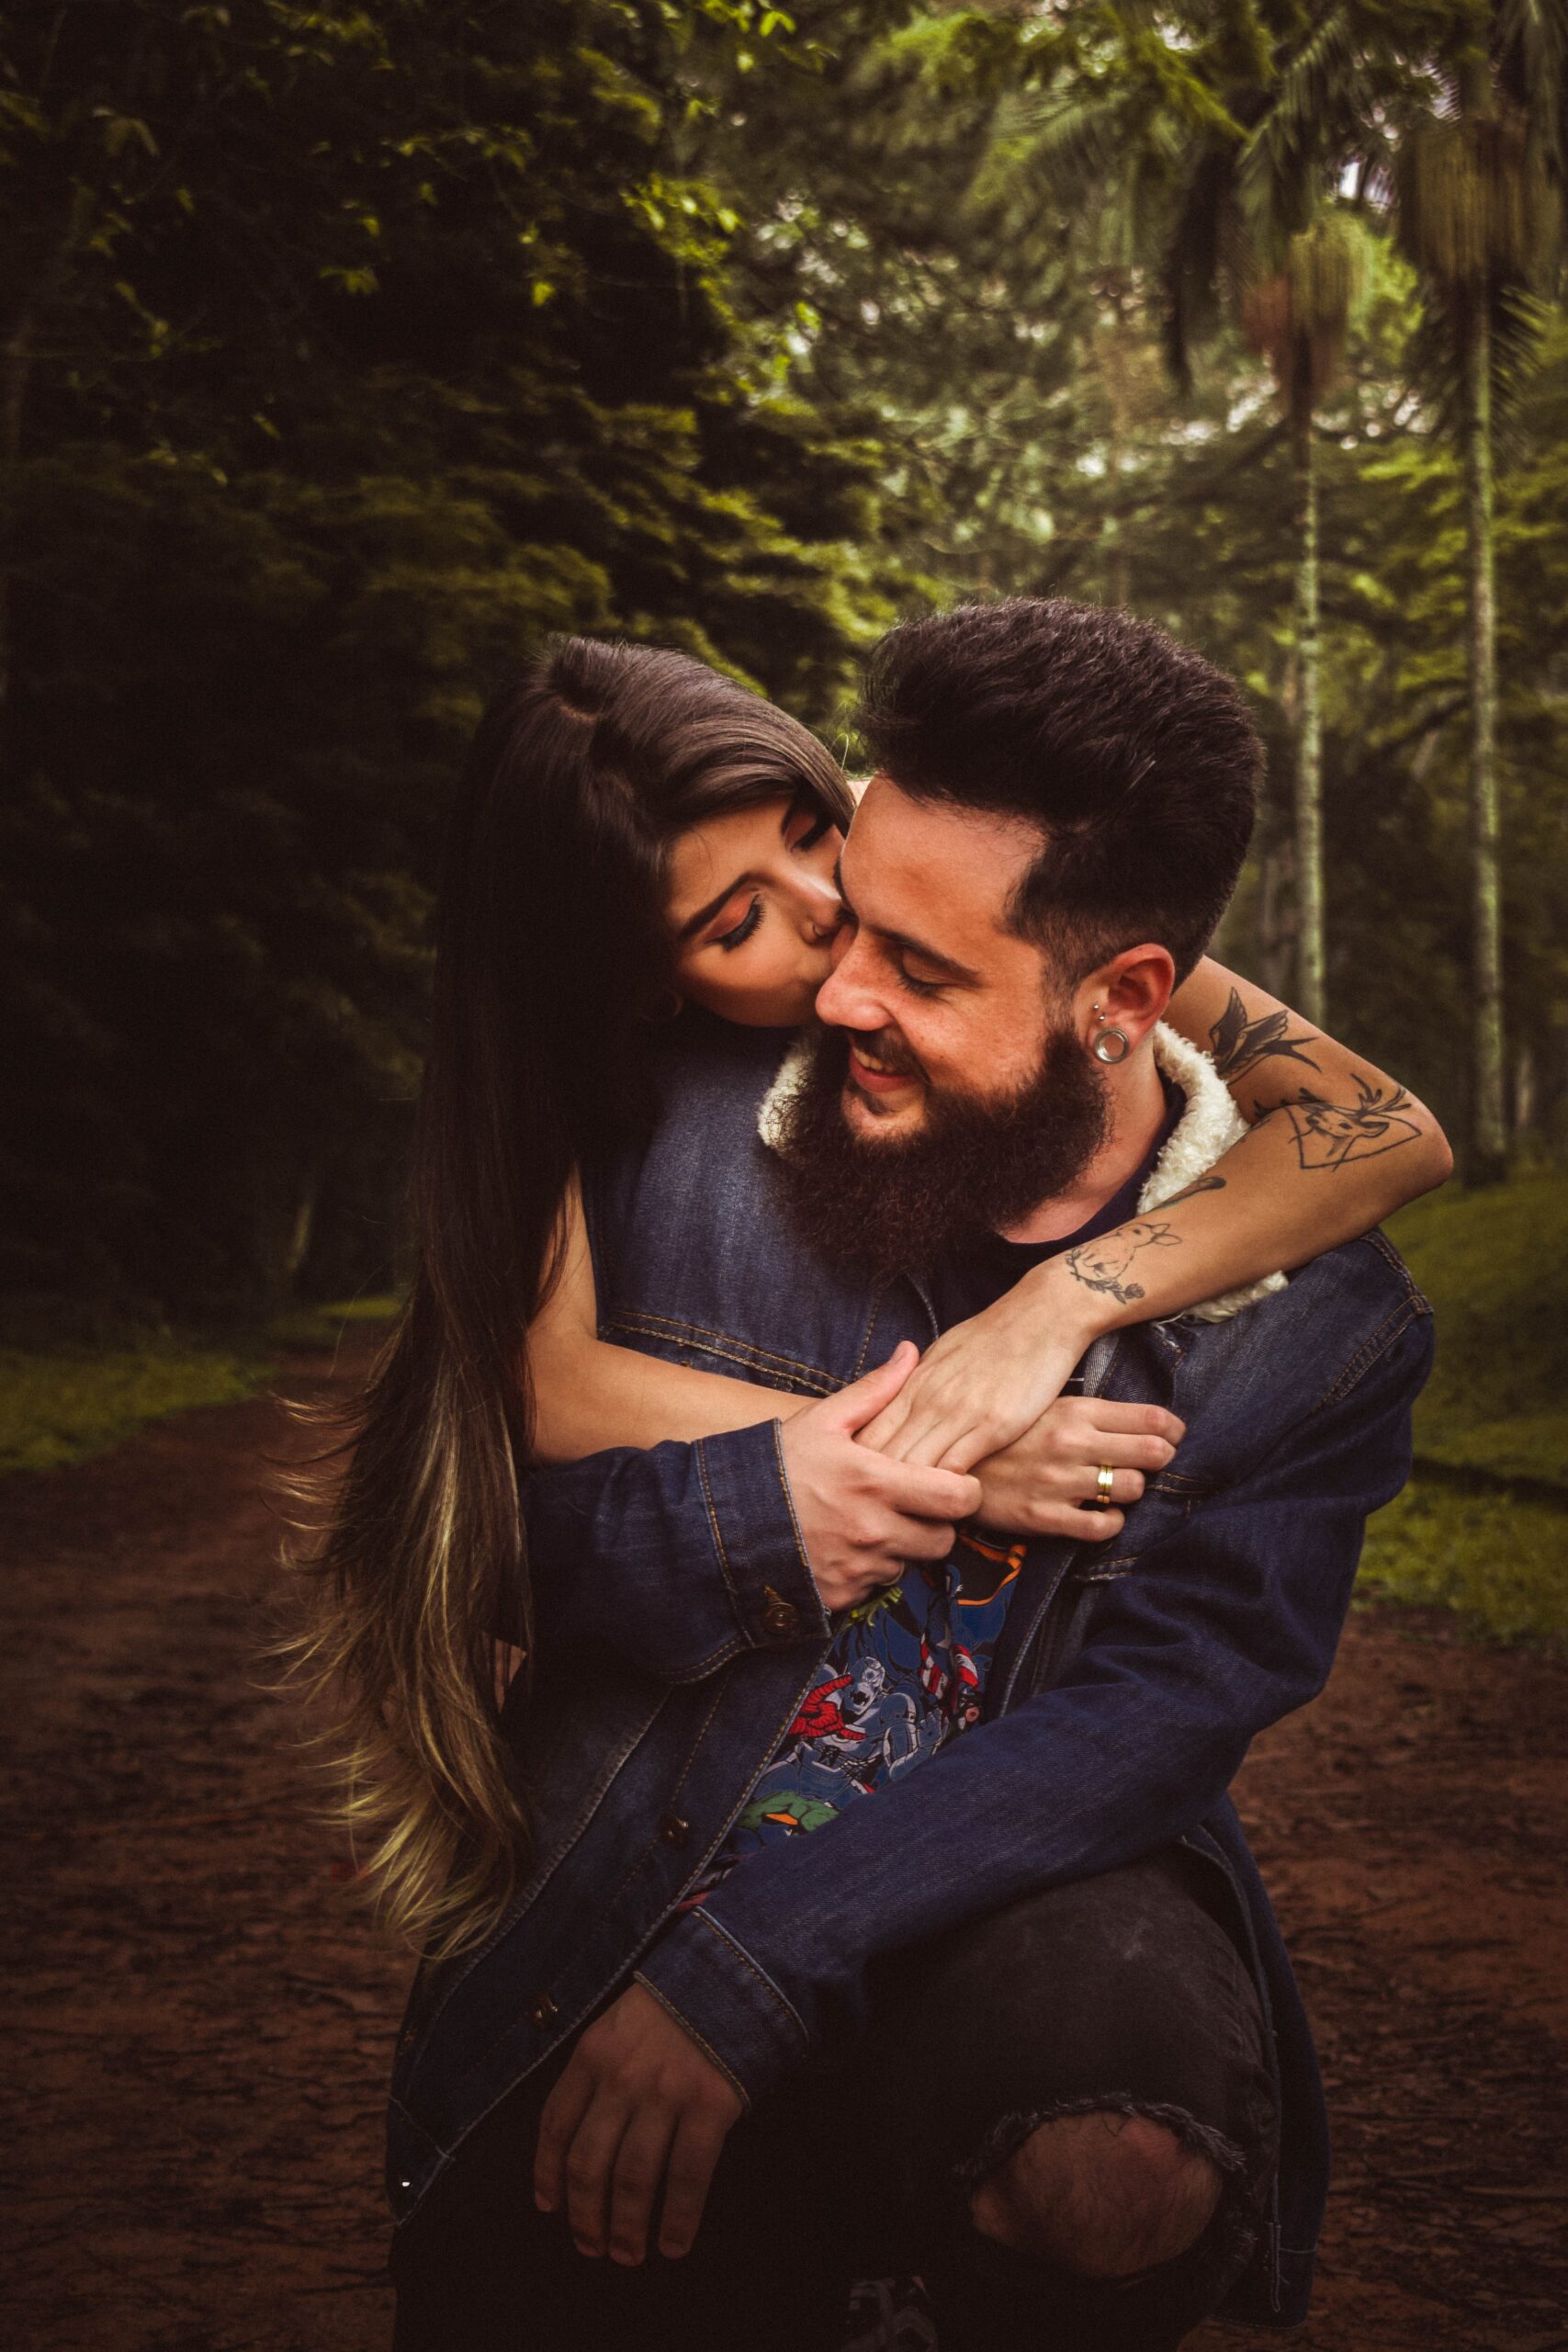 Girl with long black hair holding man with beard and jacket from behind kissing him on the cheek. They are standing on a dirt road in the middle of the woods.